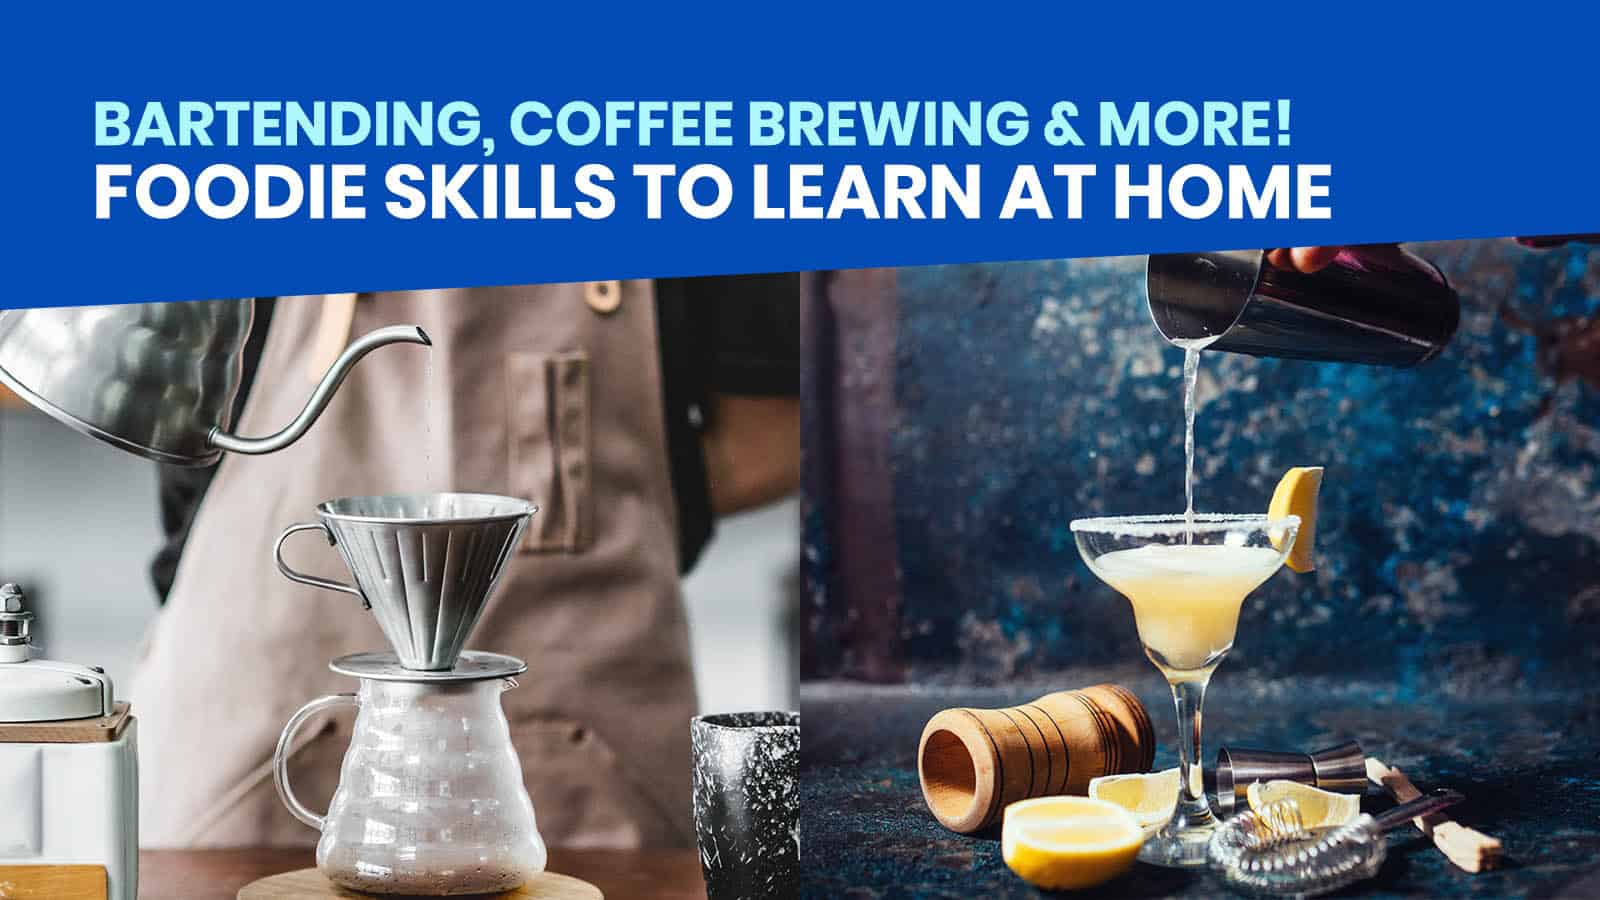 8 FOODIE SKILLS You Can Learn at Home: Bartending, Coffee Brewing, Pasta Making & More!